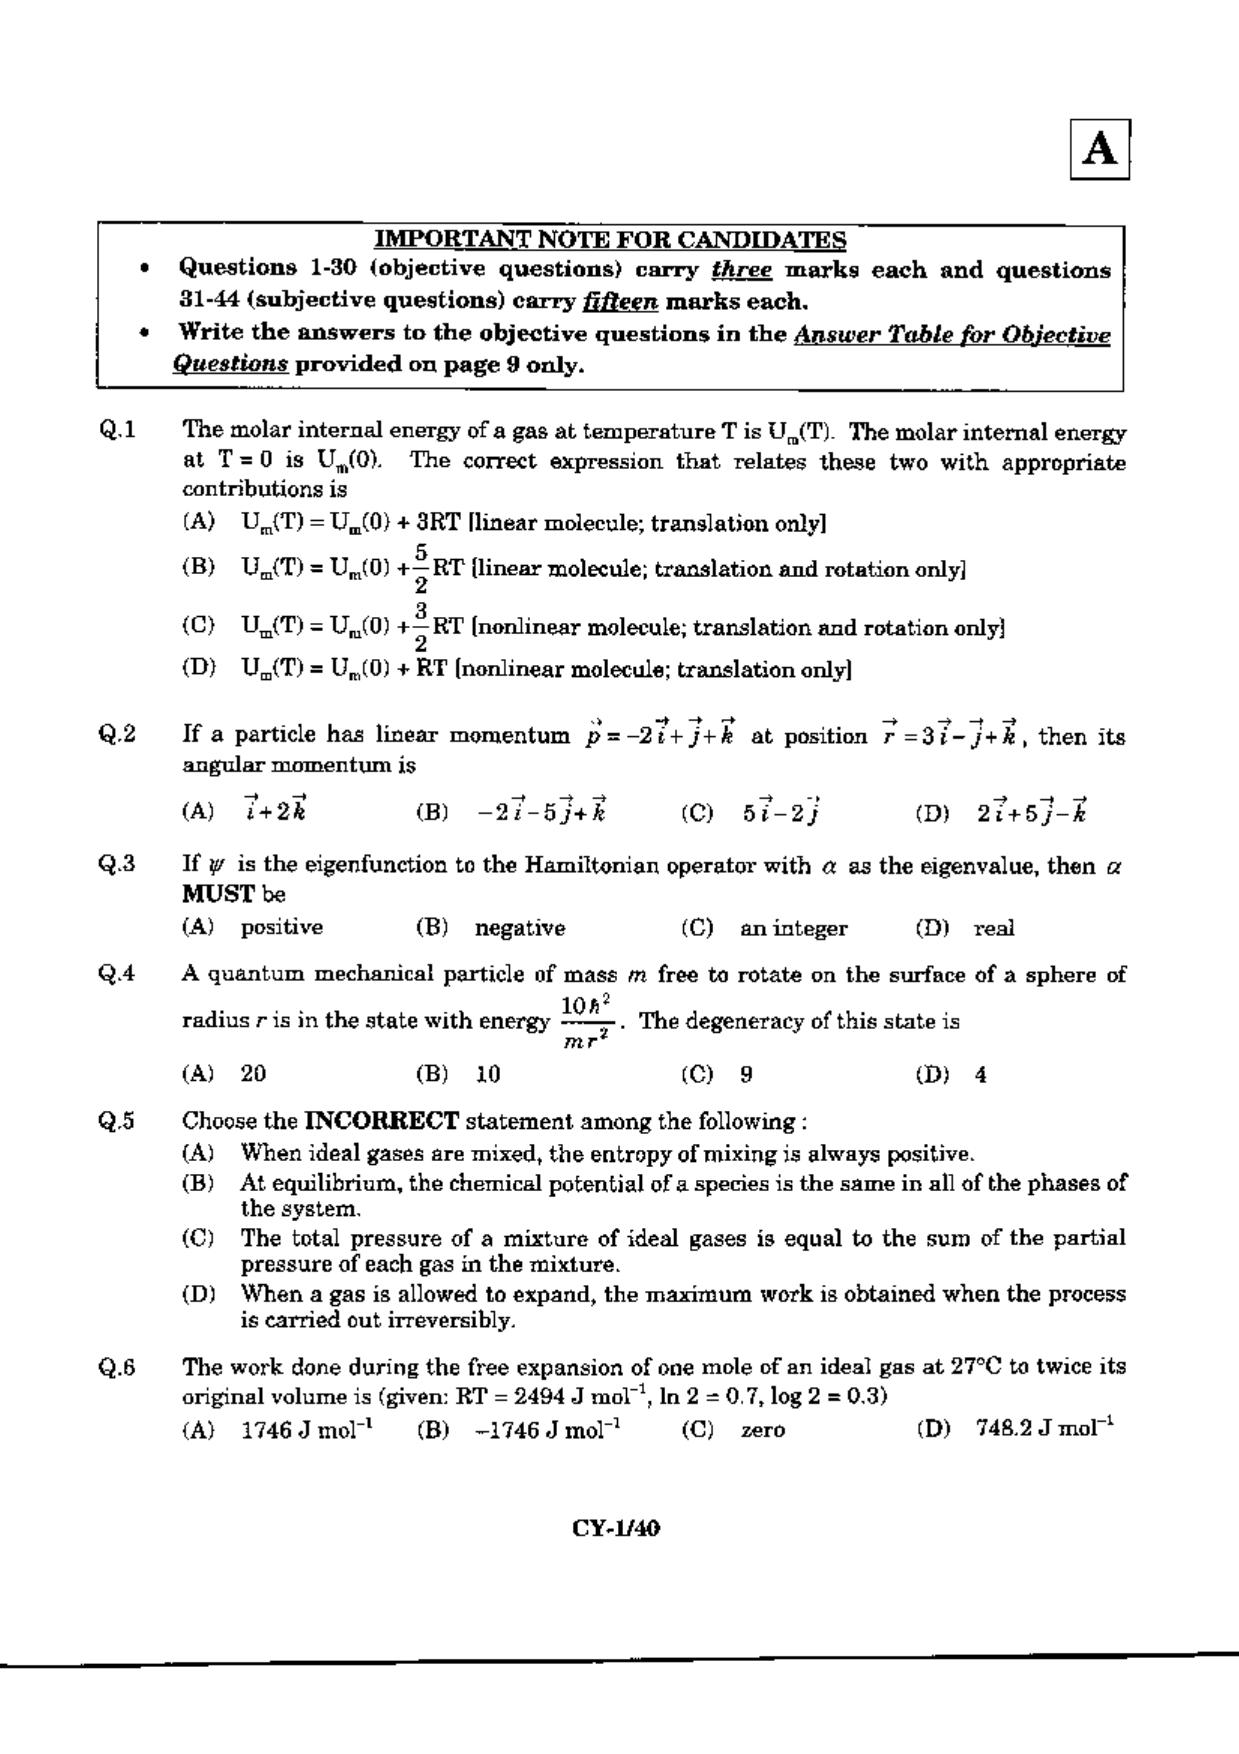 JAM 2010: CY Question Paper - Page 3